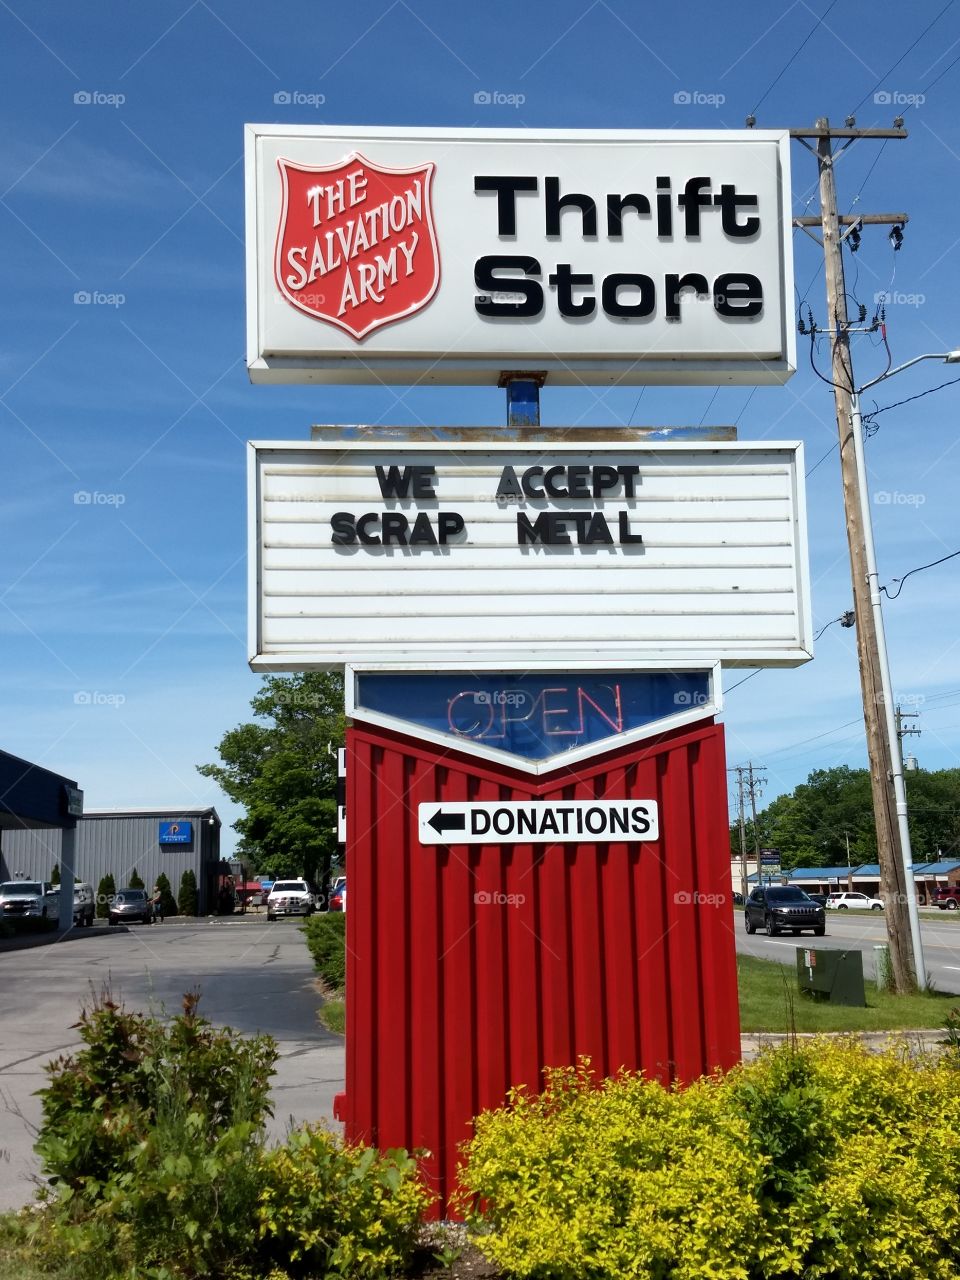 Salvation Army Thrift Store sign